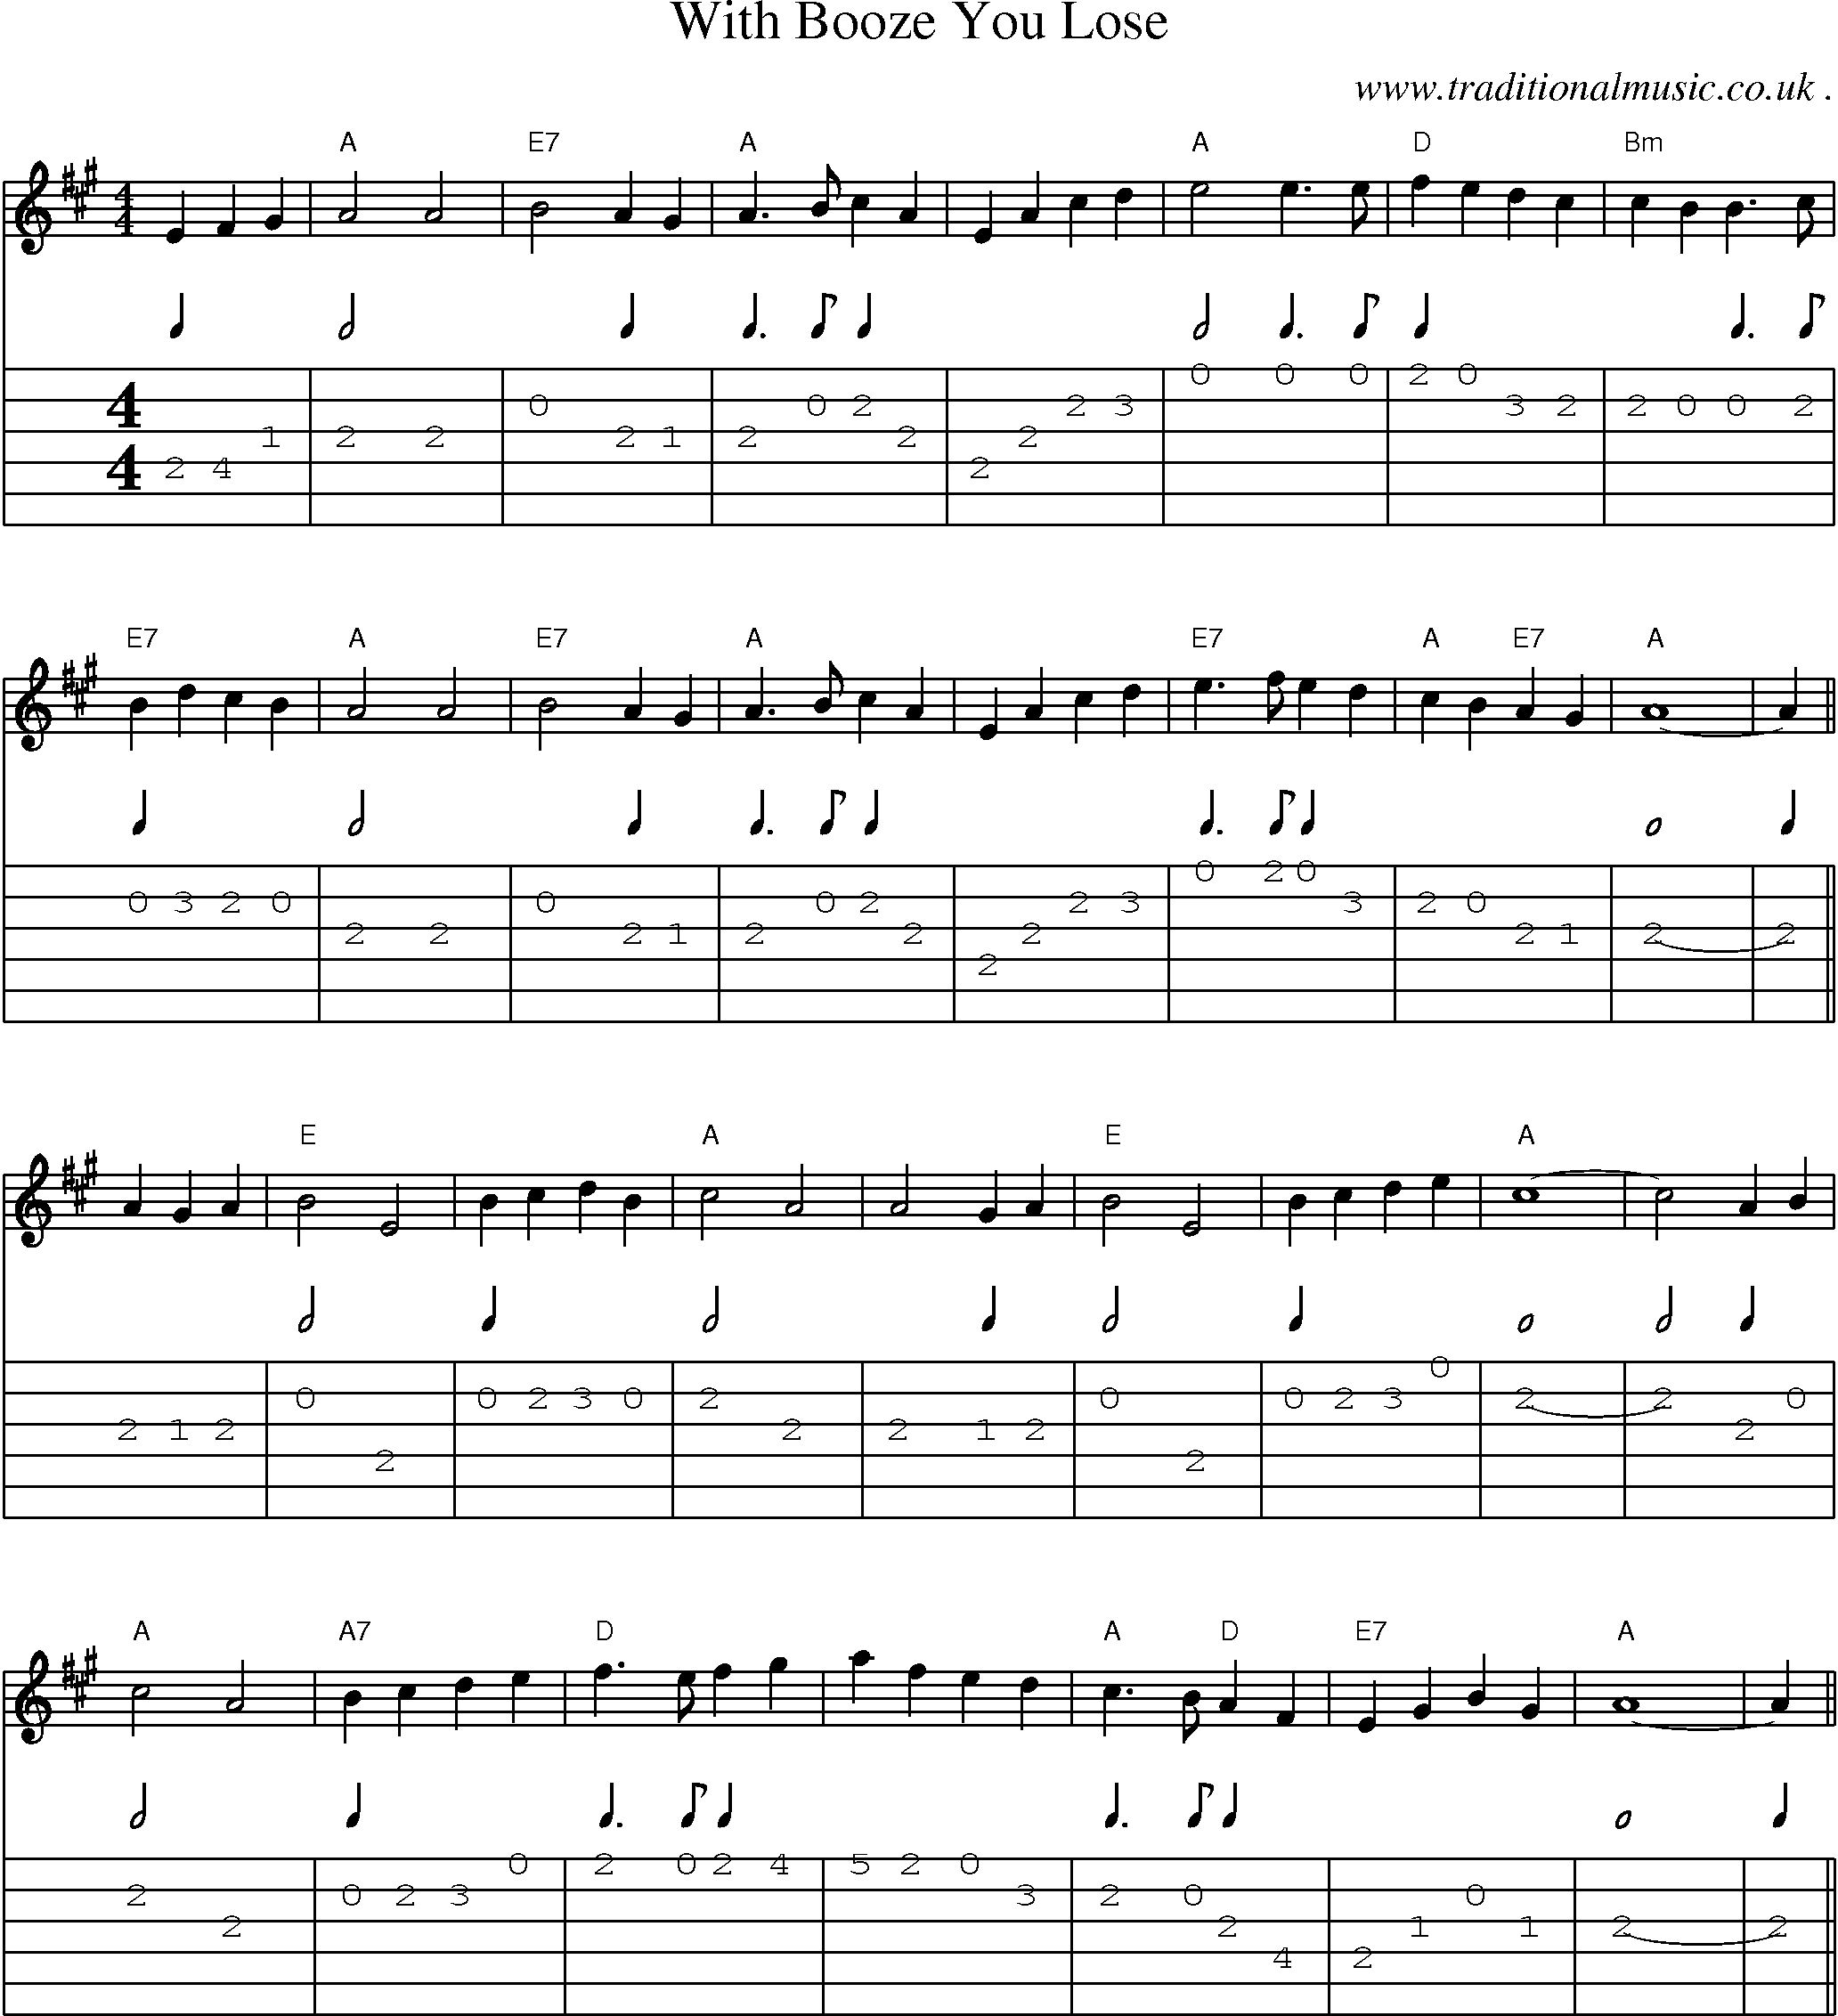 Sheet-Music and Guitar Tabs for With Booze You Lose